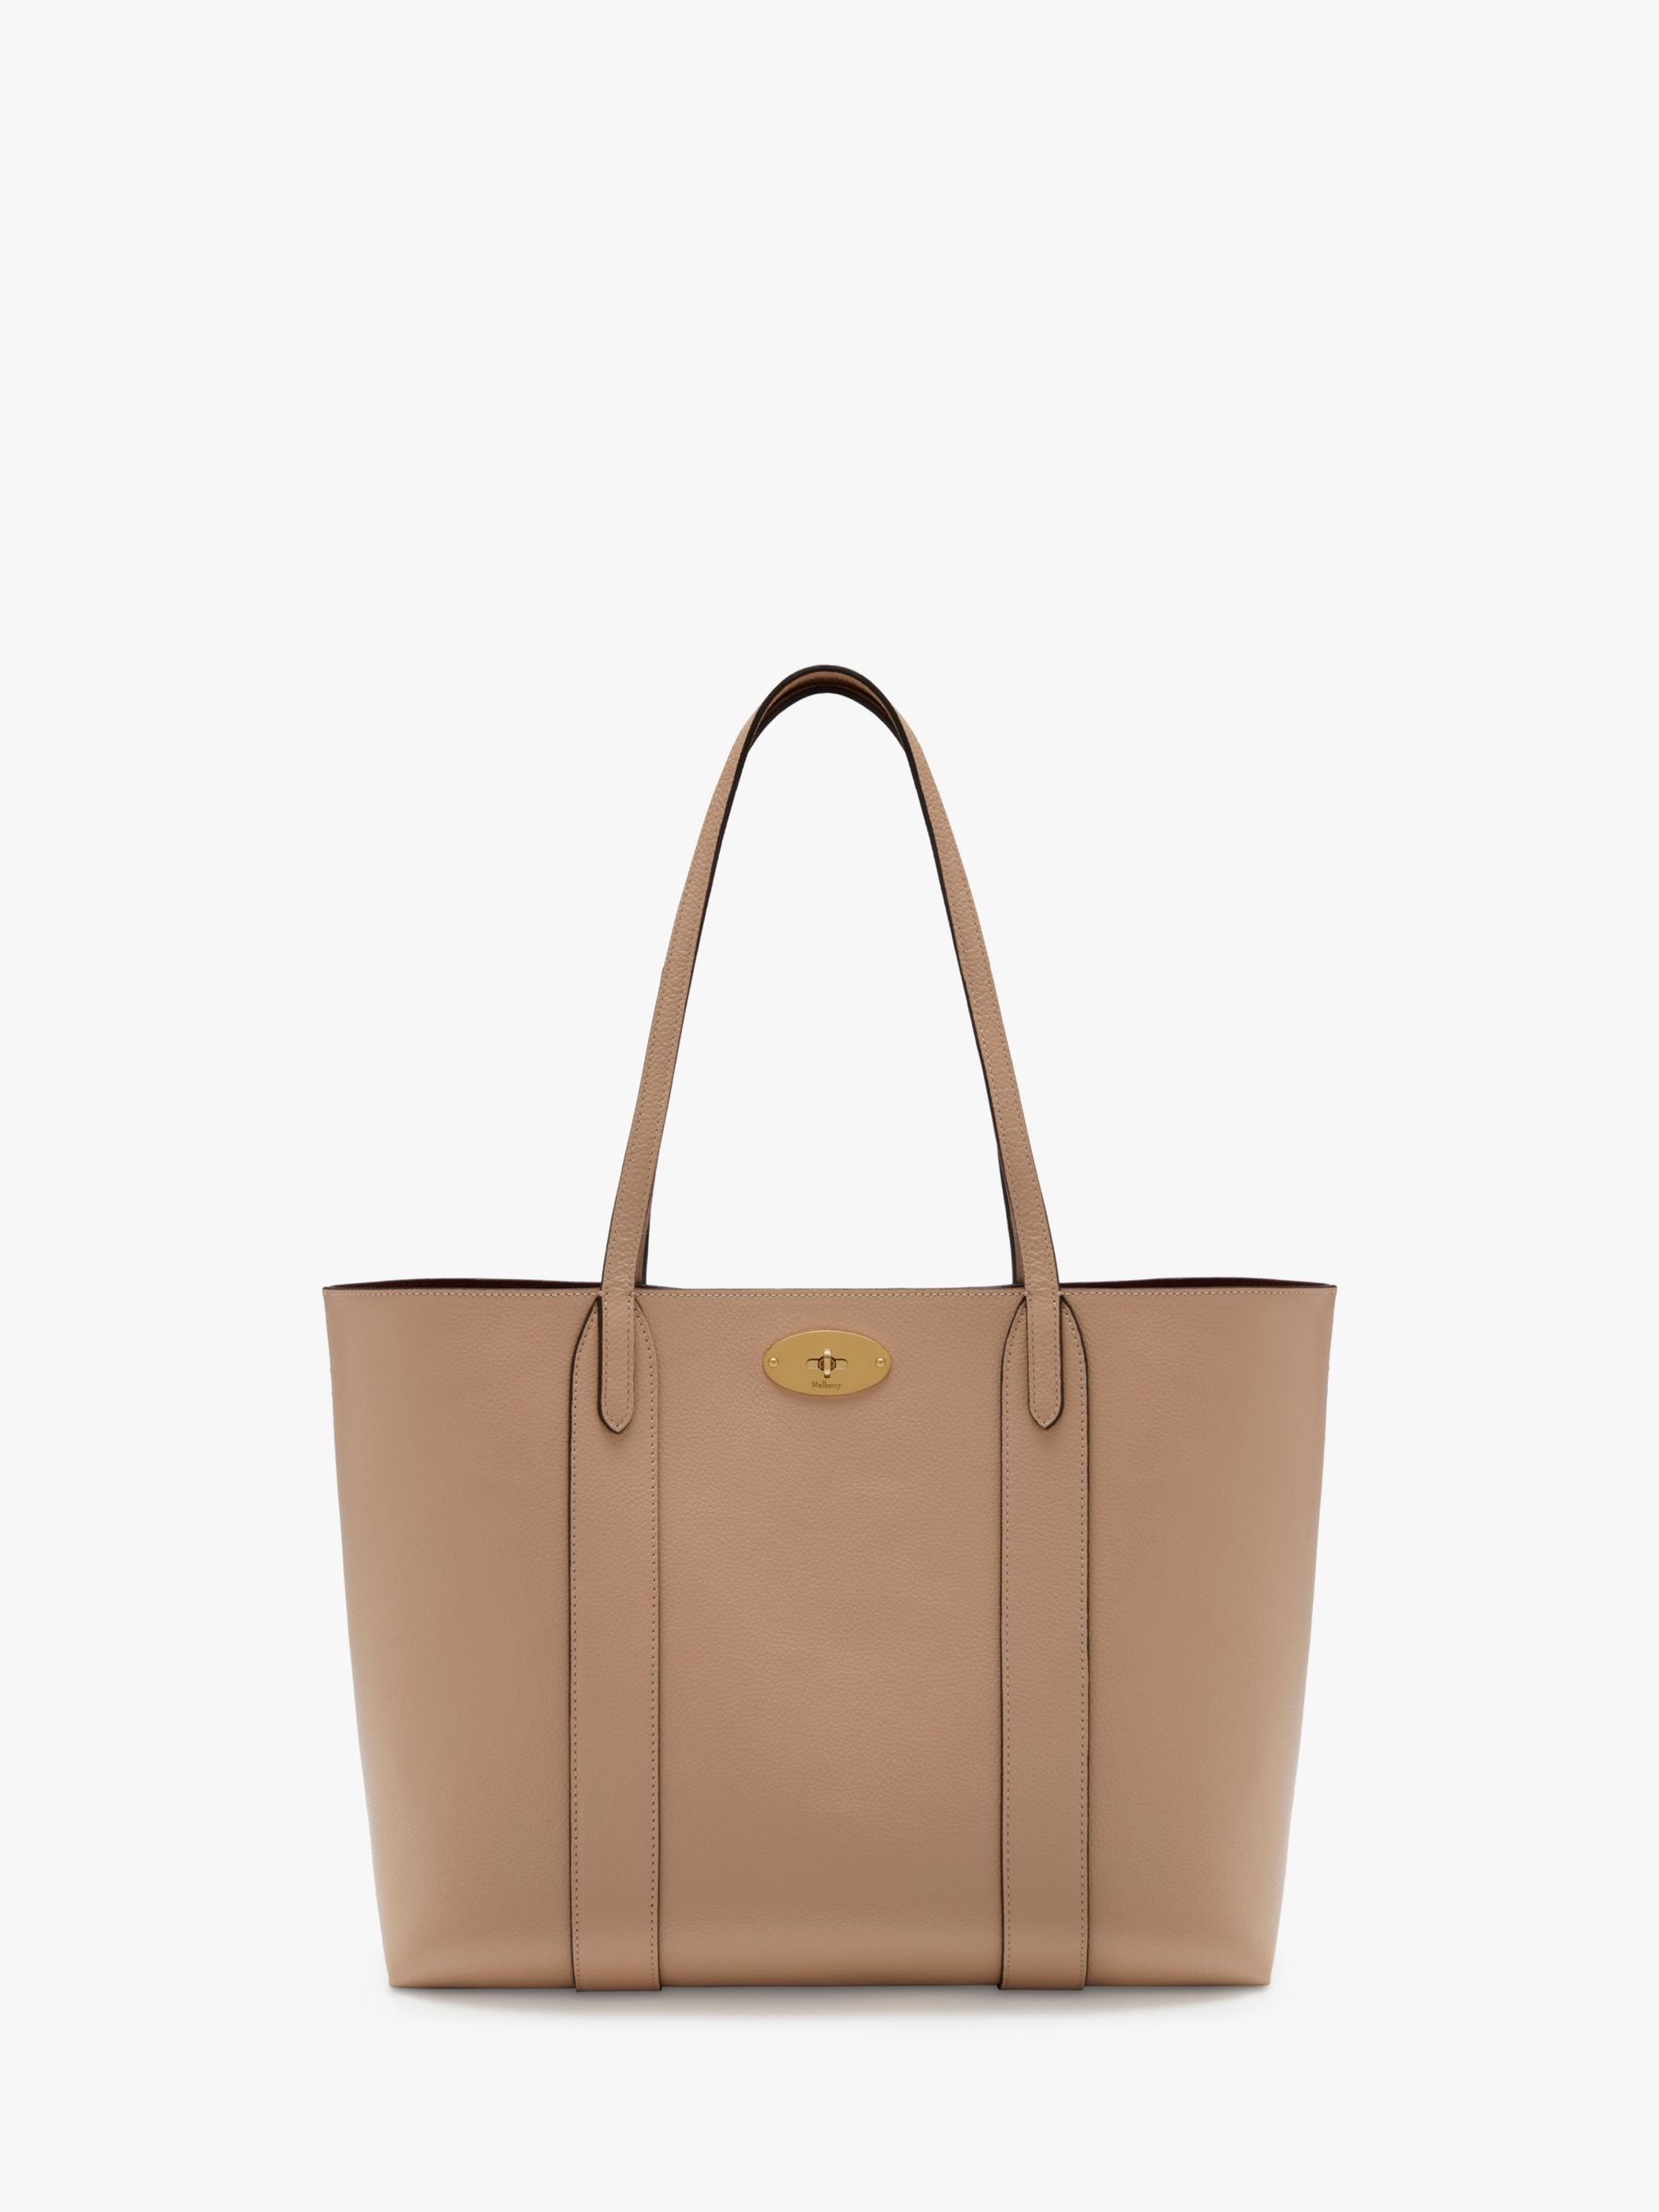 Mulberry Bayswater Small Classic Grain Leather Tote Bag at John Lewis & Partners